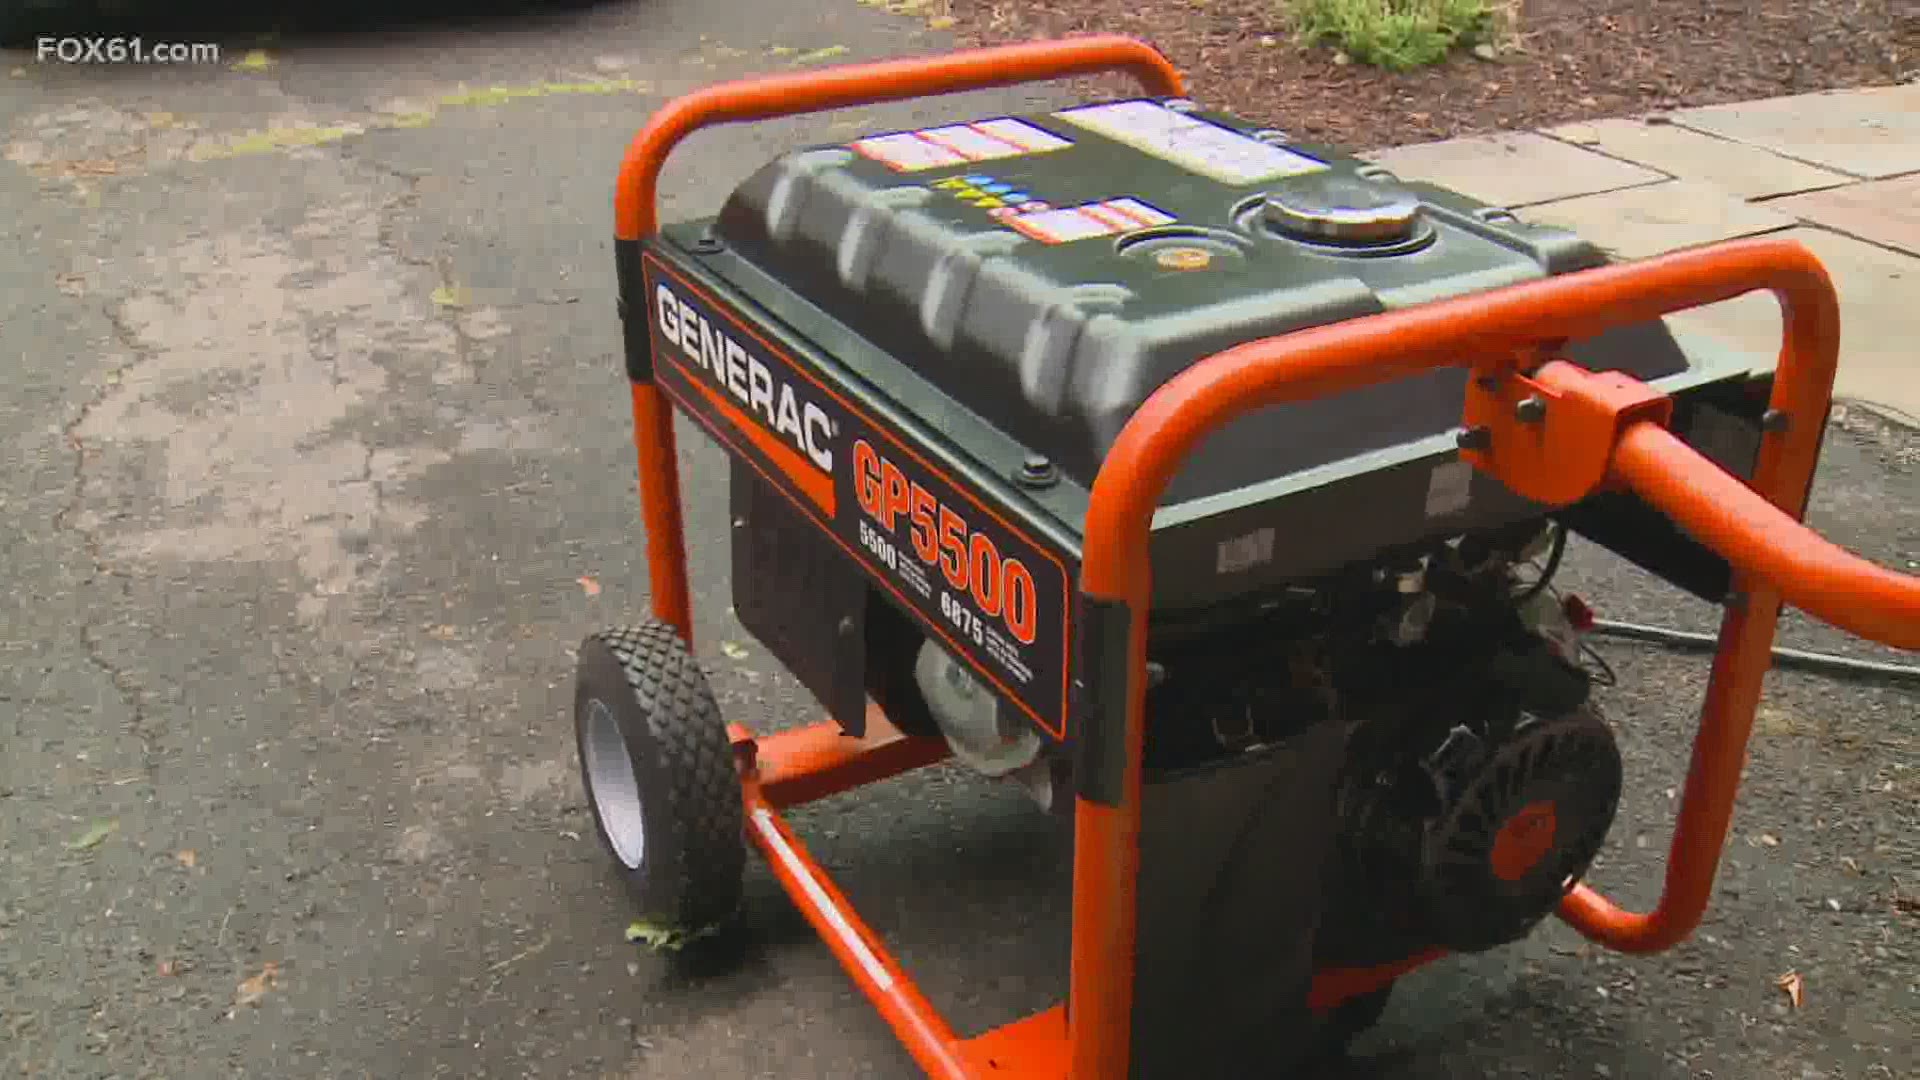 Carbon monoxide poisoning is a real risk with portable generators.